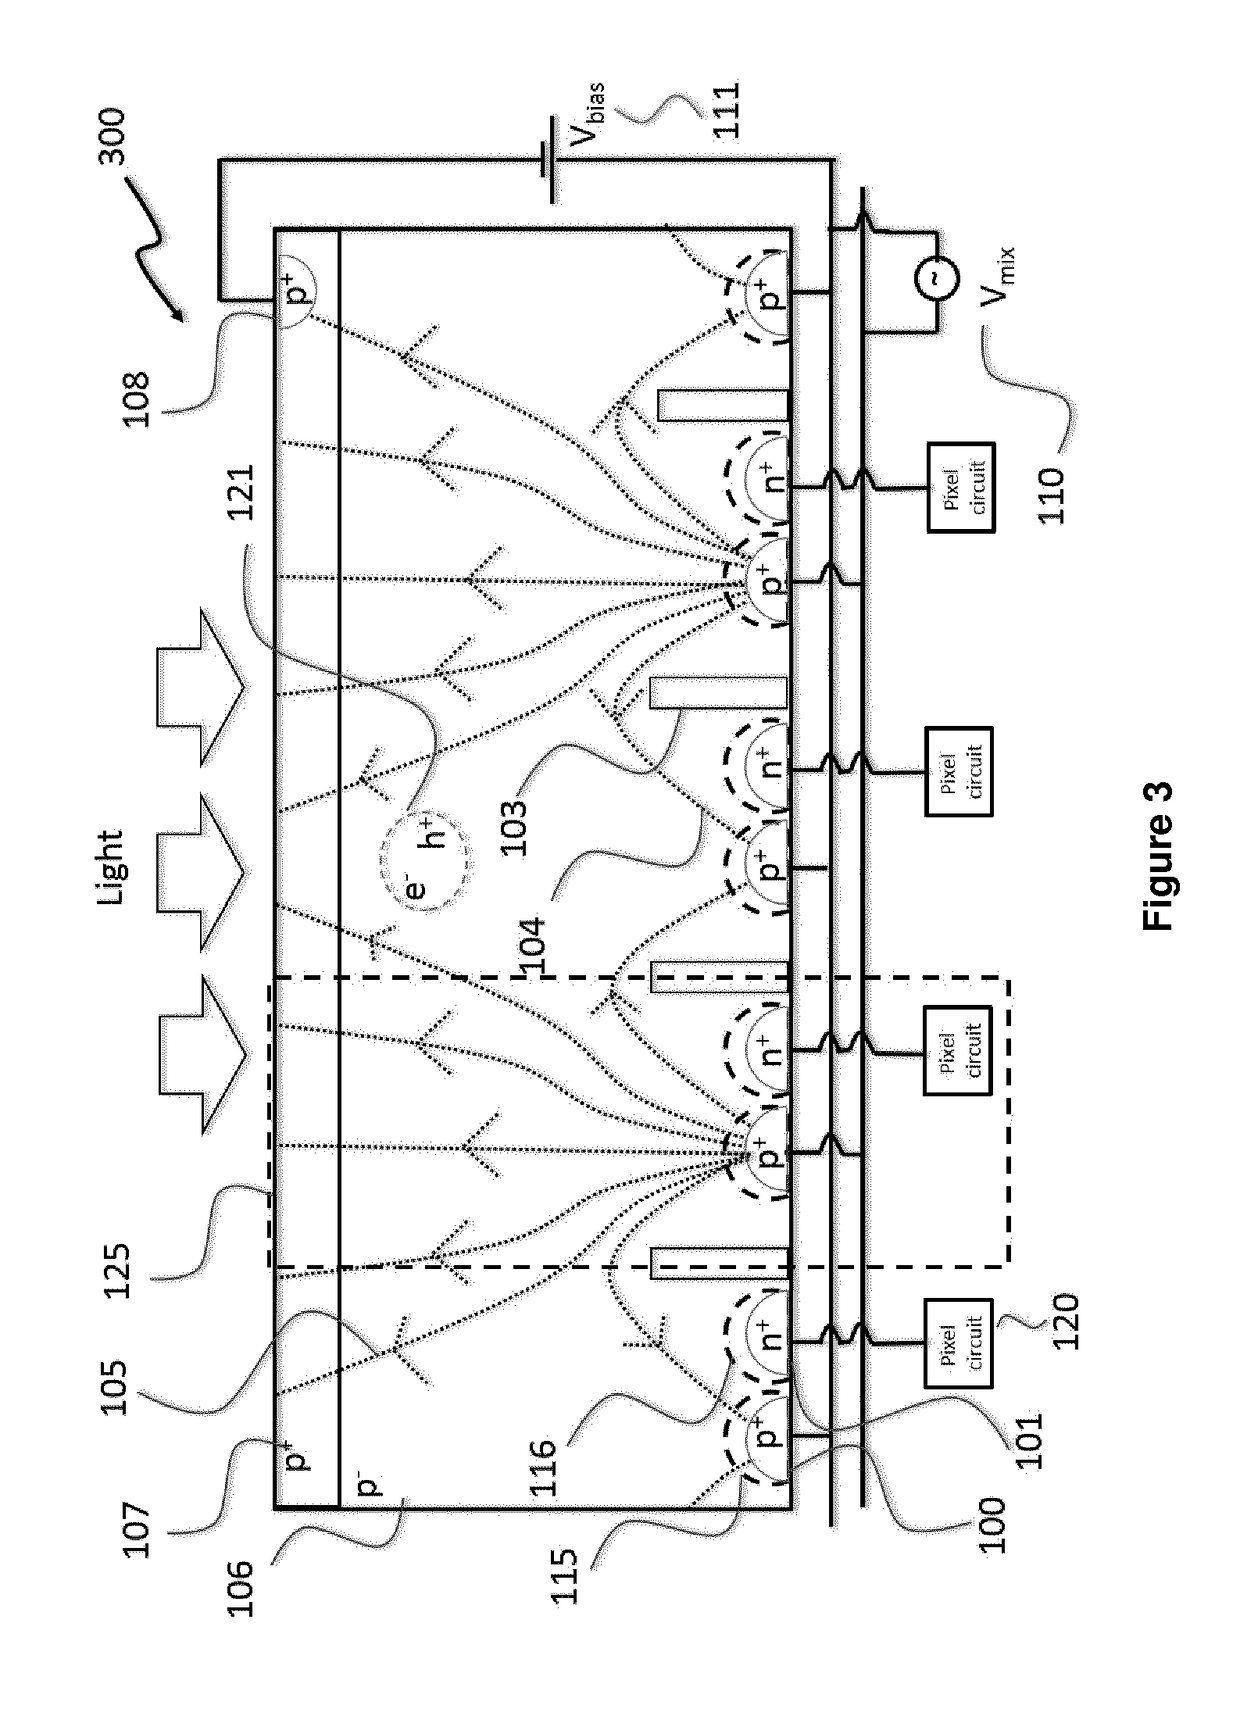 A detector device with majority current and a circuitry for controlling the current